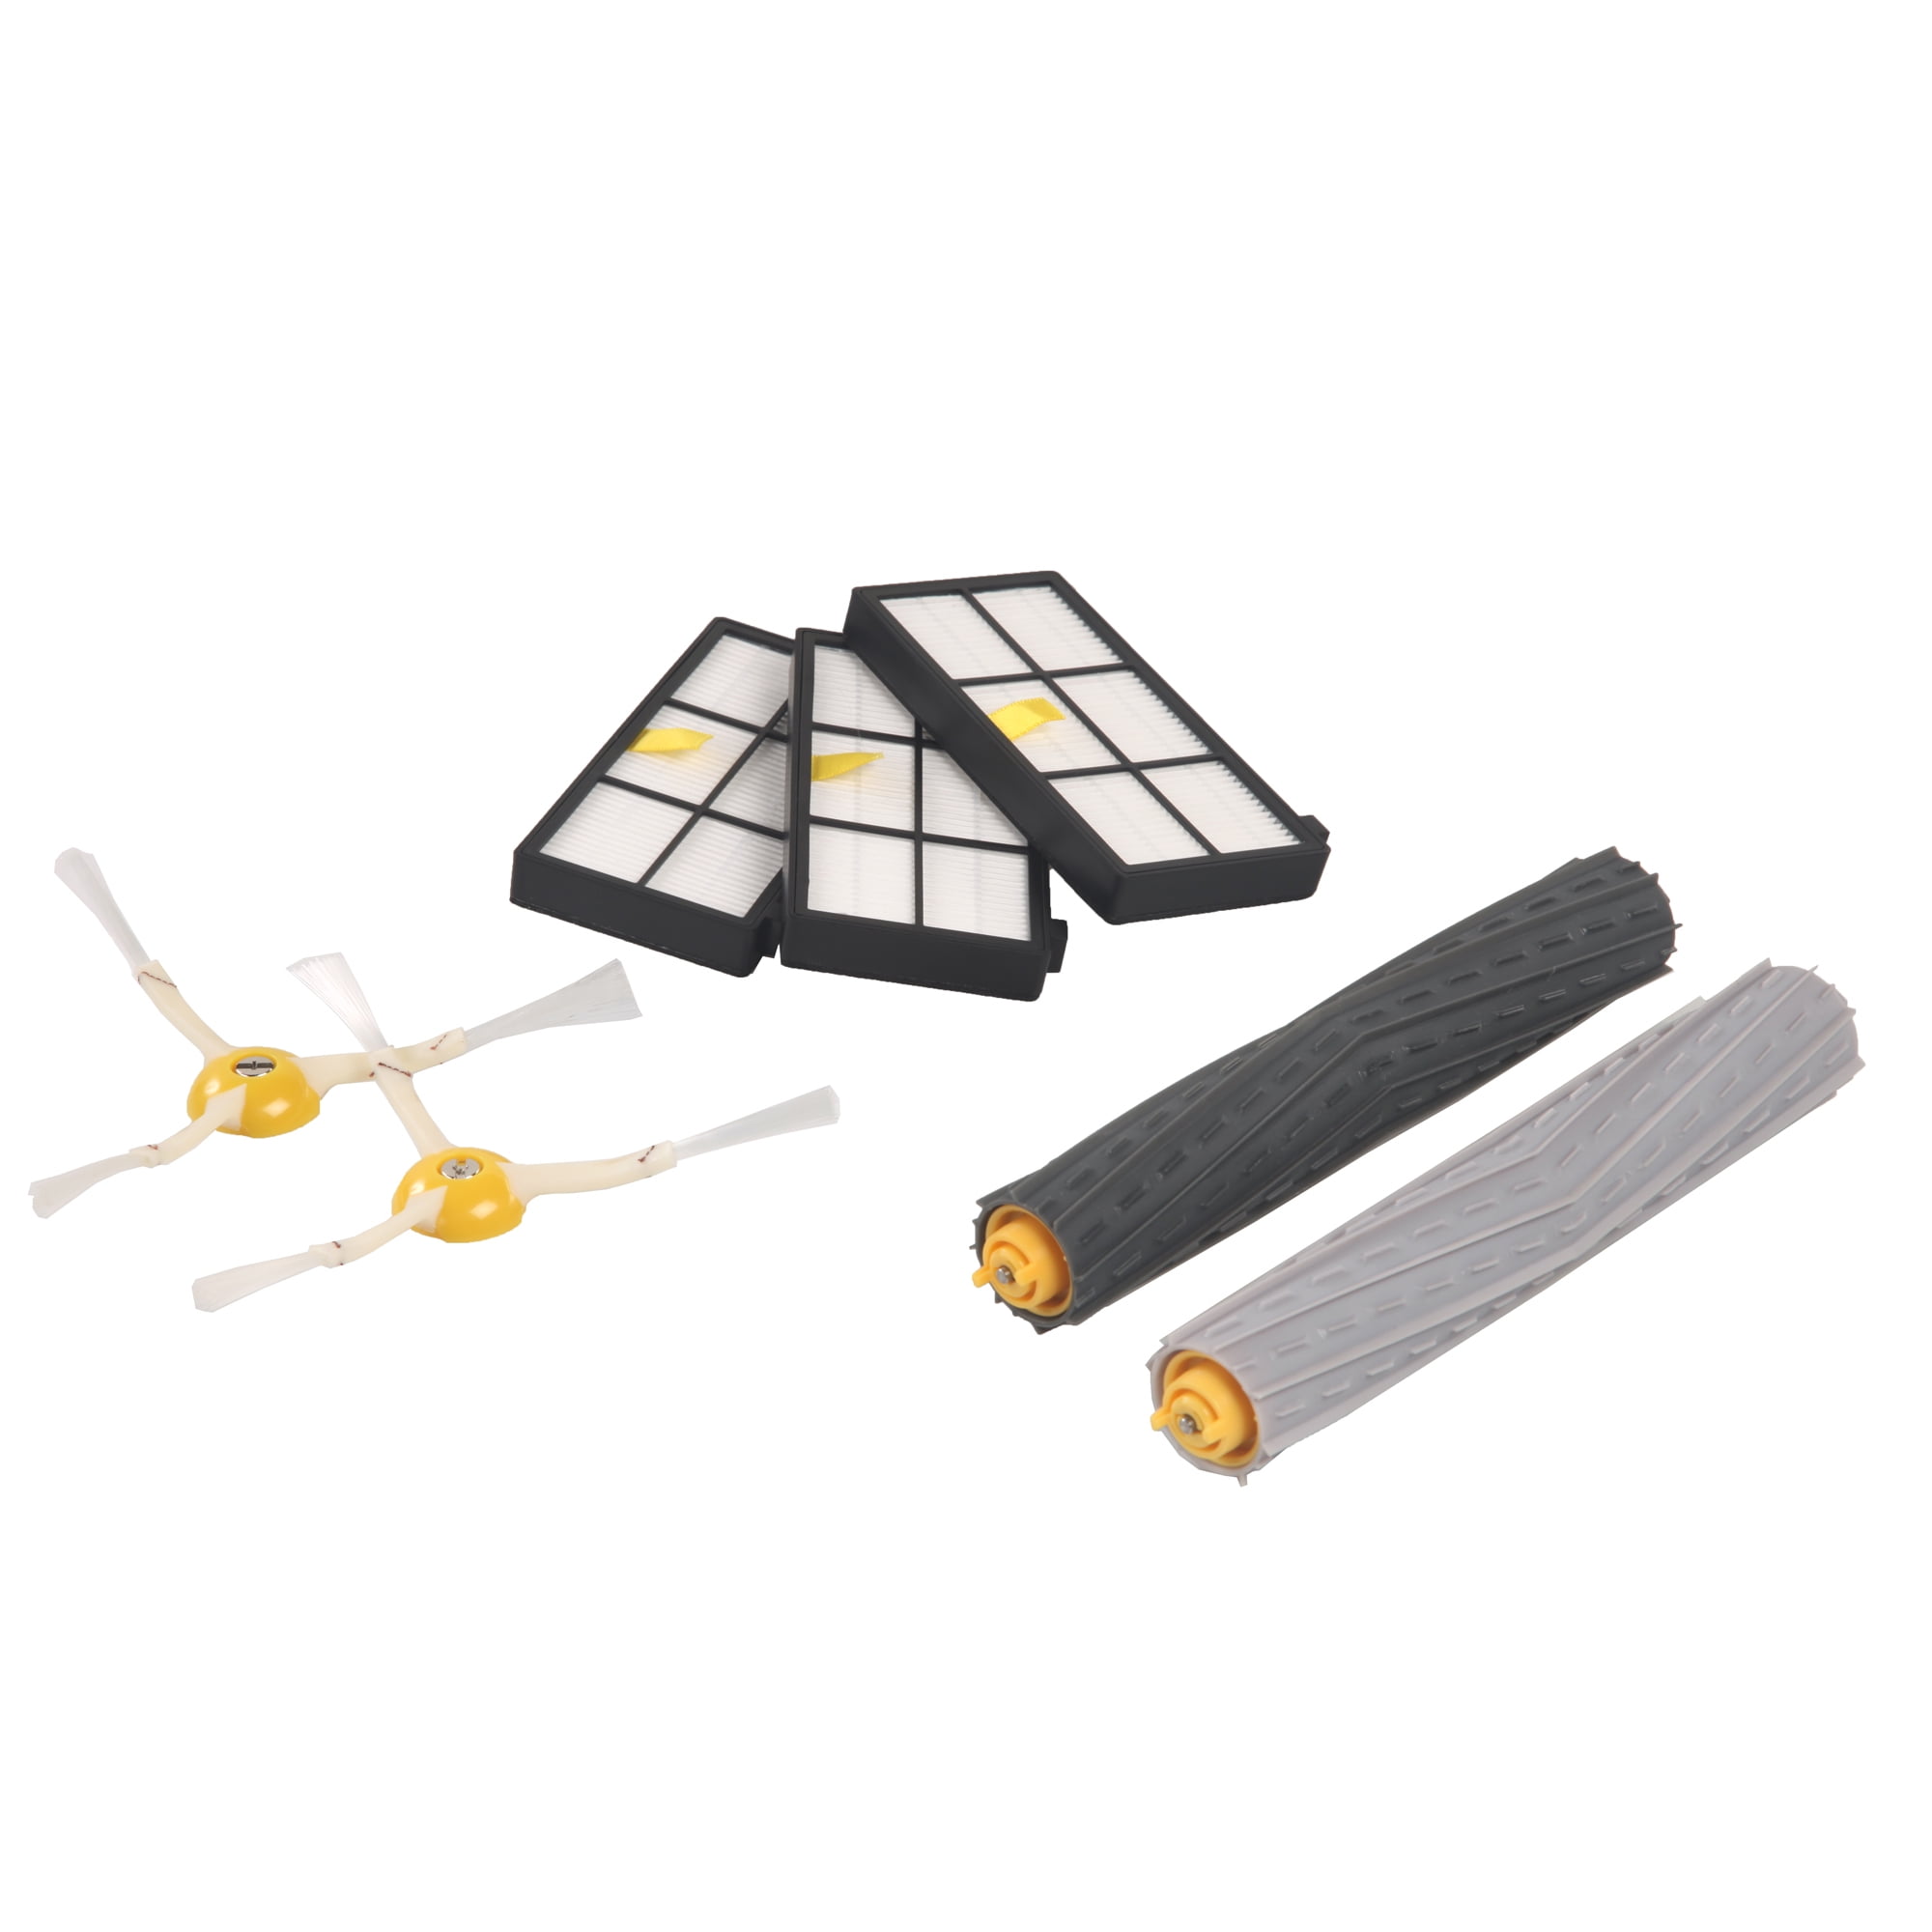  iRobot Roomba Authentic Replacement Parts - Roomba 800 and 900  Series Replenishment Kit (3 AeroForce Filters, 2 Spinning Side Brushes, and  1 Set of Multi-Surface Rubber Brushes)